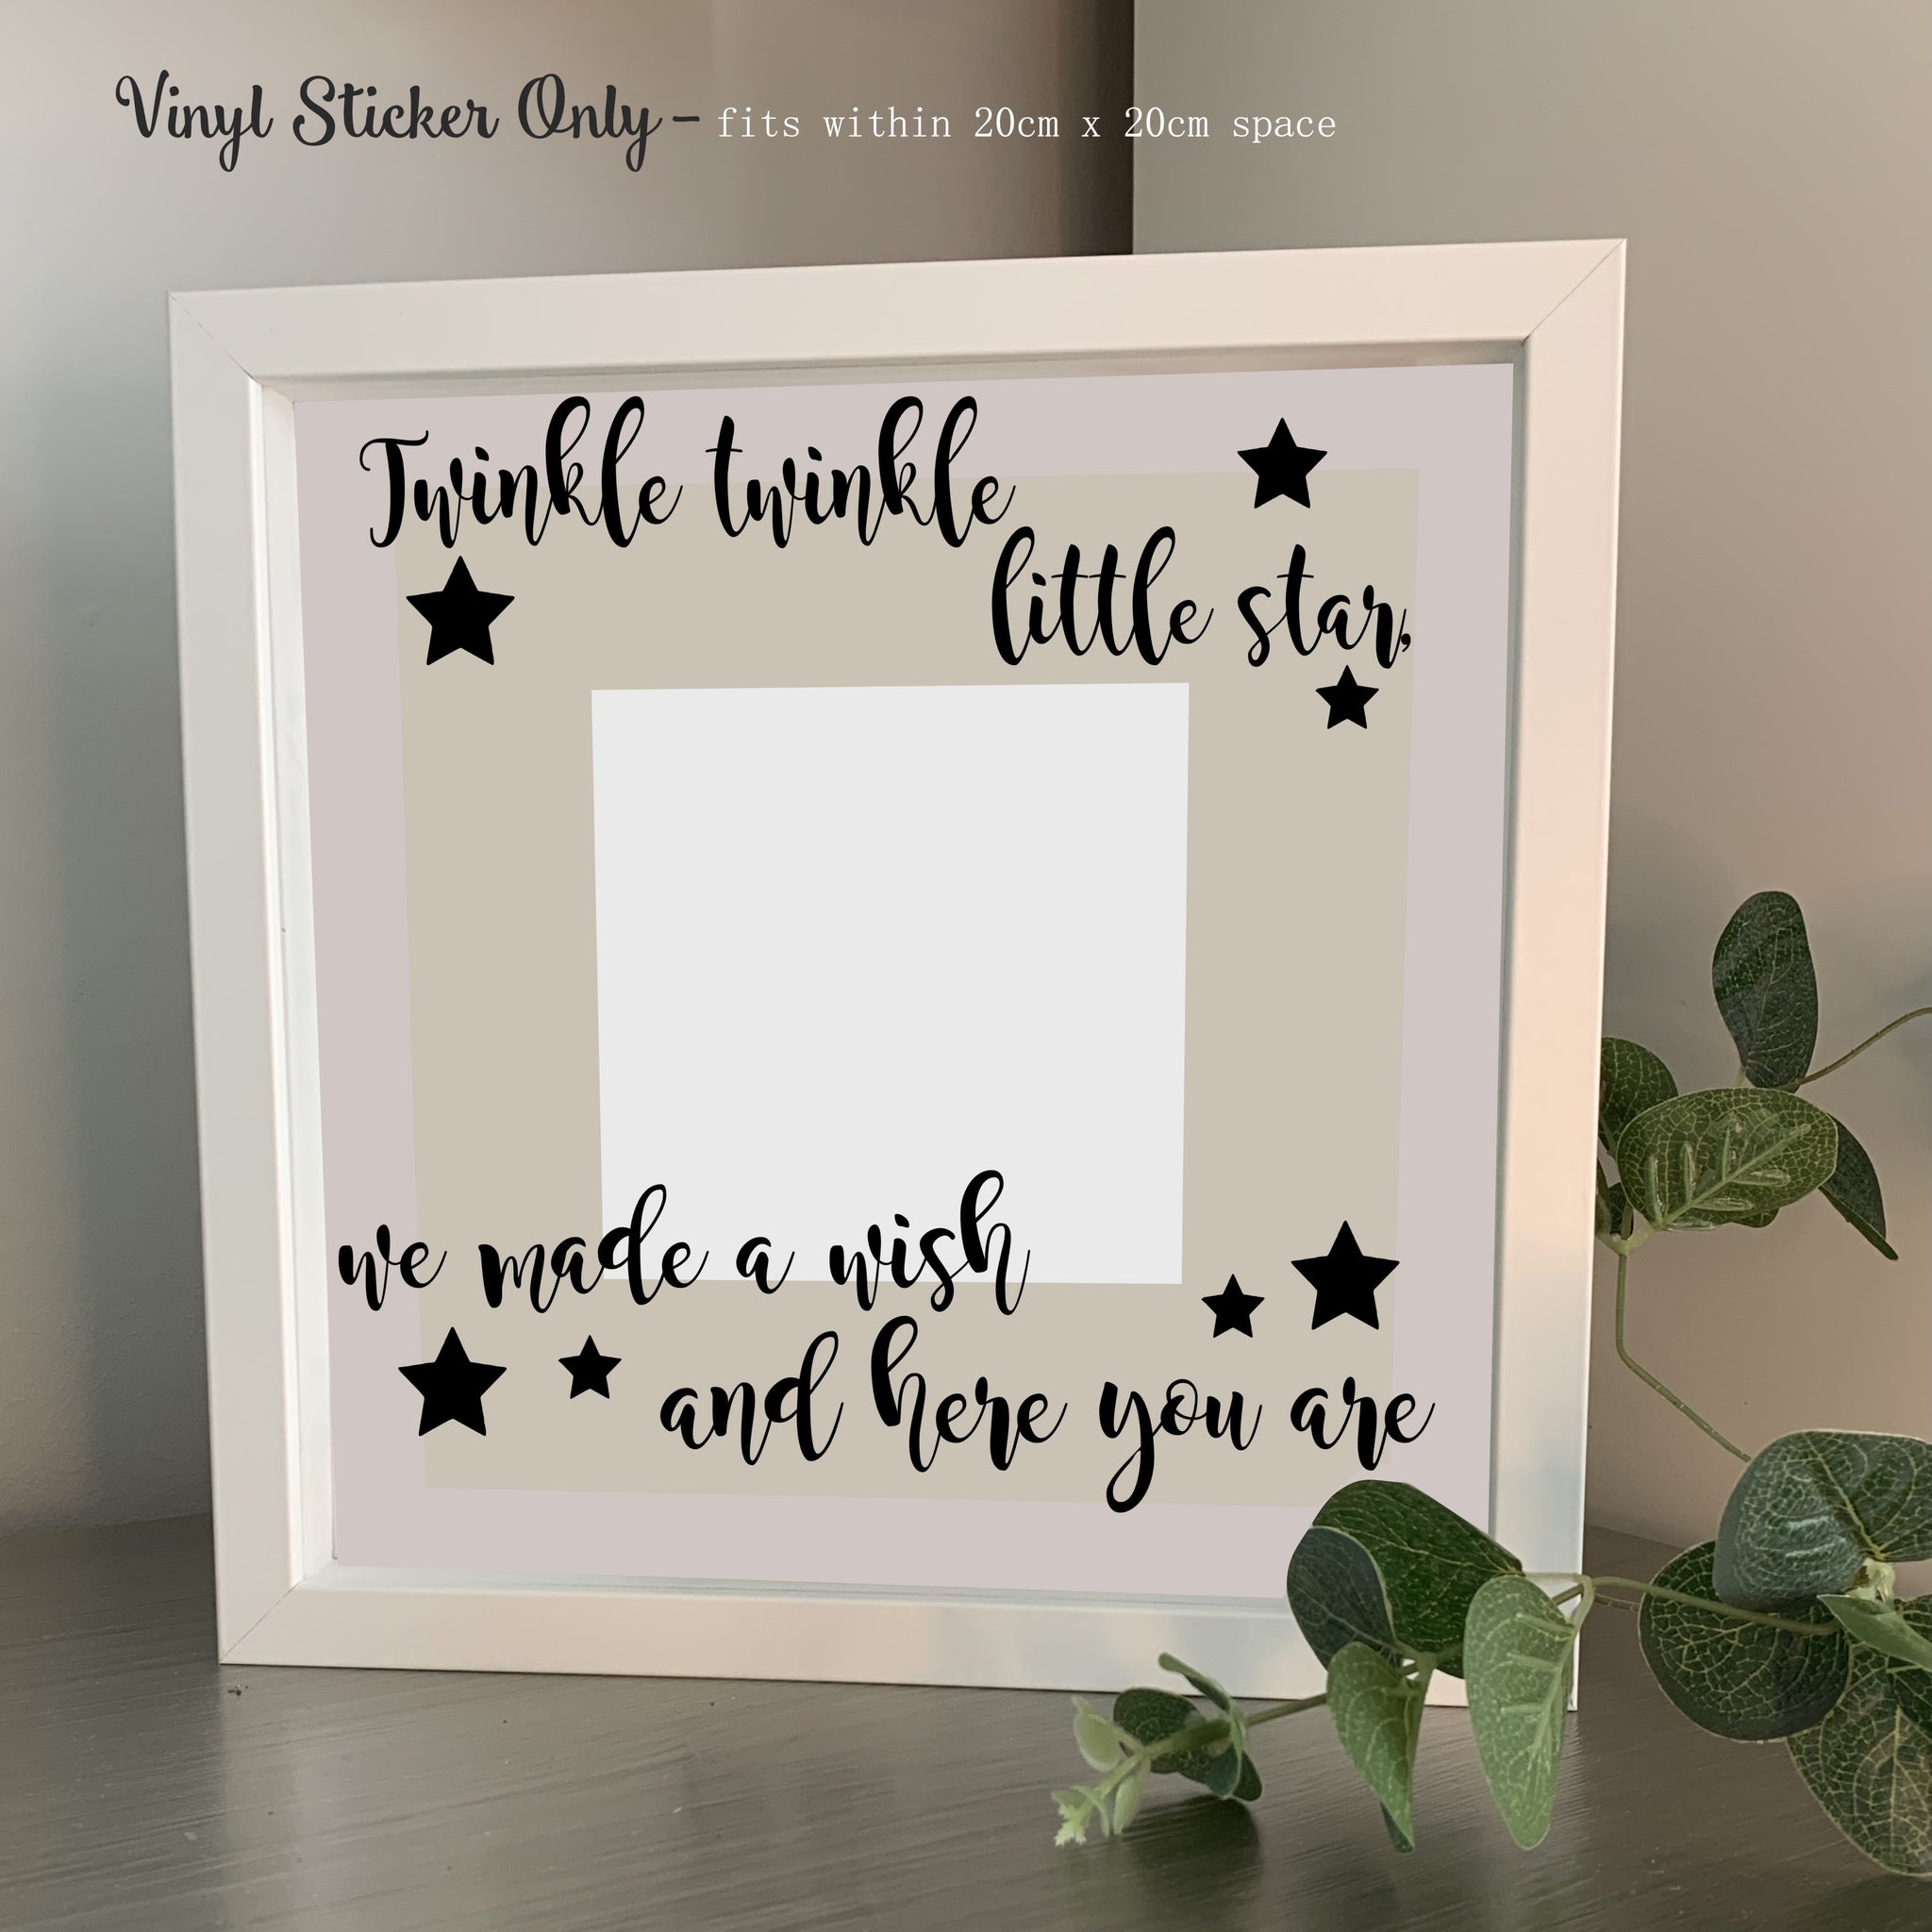 Twinkle Twinkle little star, we made a wish and here you are  | Die Cut Vinyl Sticker